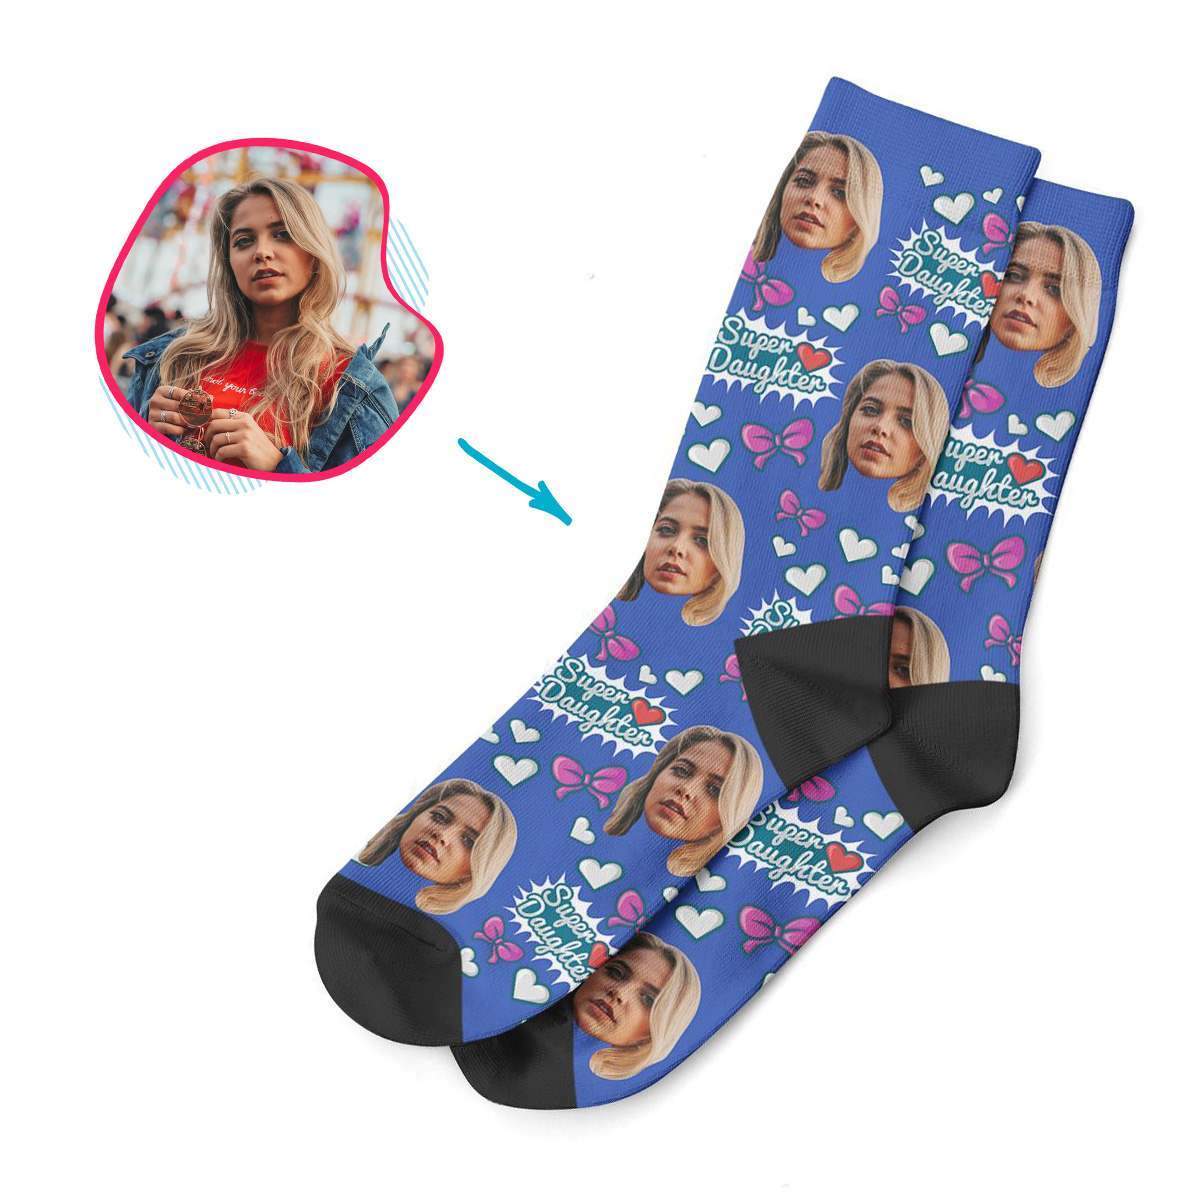 darkblue Super Daughter socks personalized with photo of face printed on them